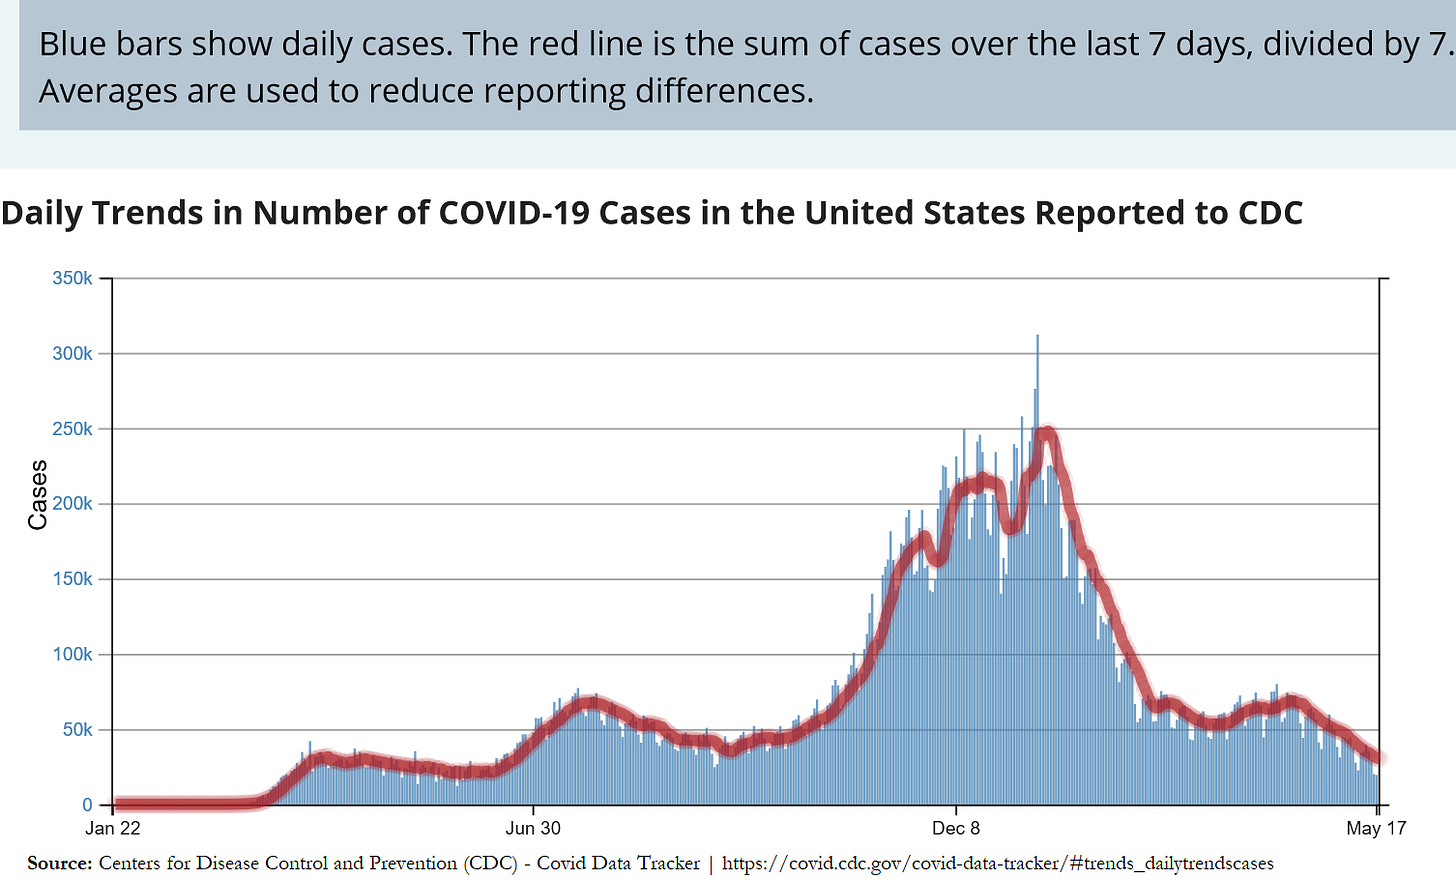 Daily trends in COVID-19 cases in the US reported to the CDC